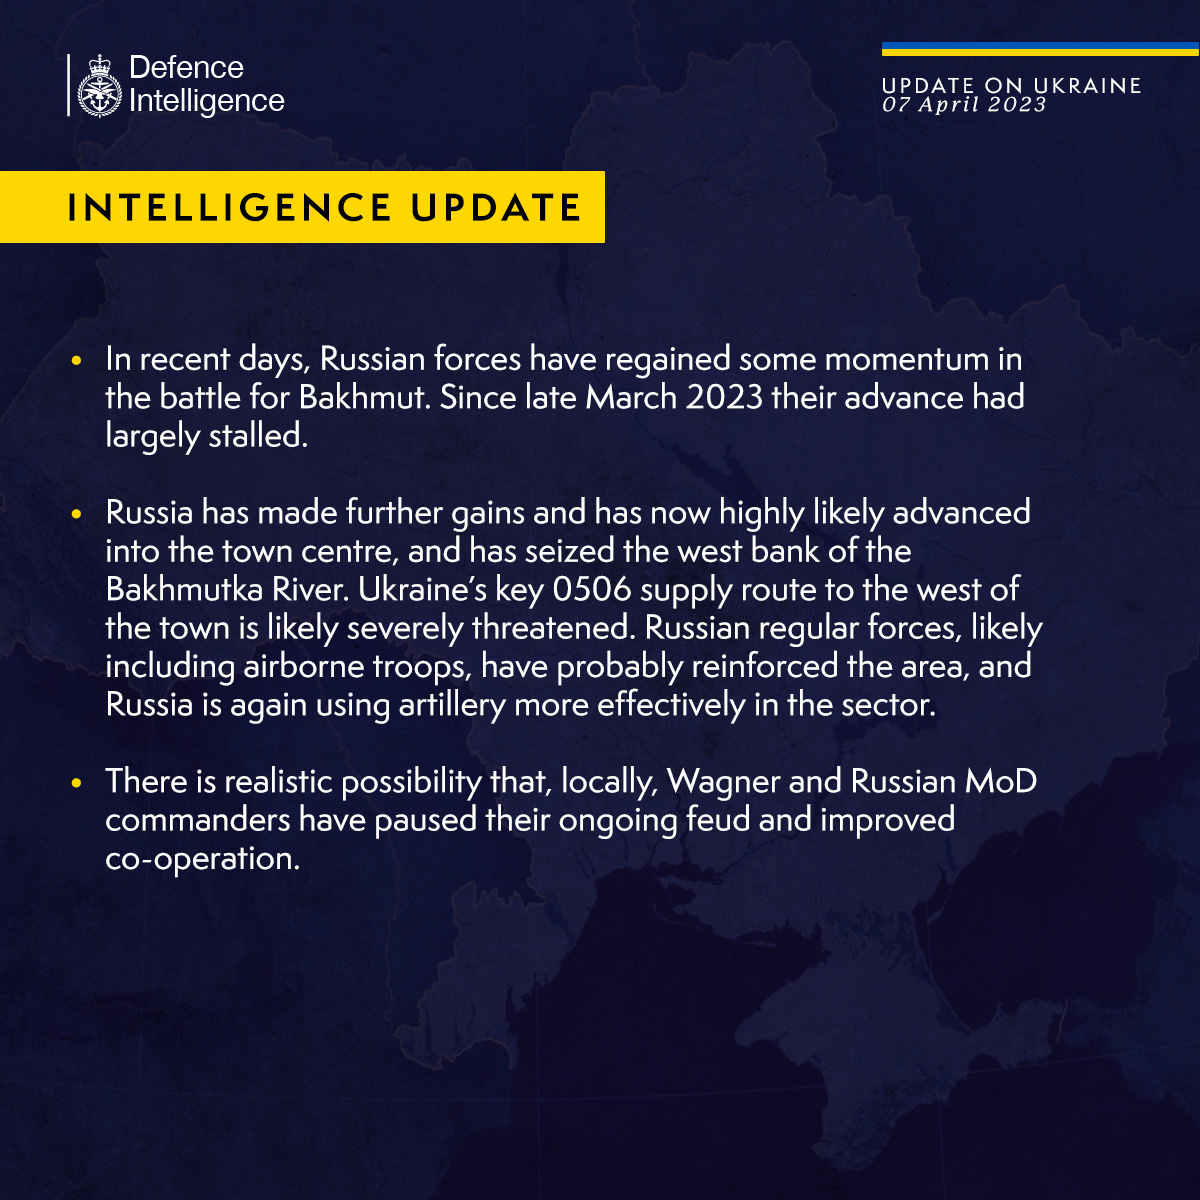 The UK Defense Intelligence Says Actions of russians in Bakhmut Area Become More Intense, Defense Express